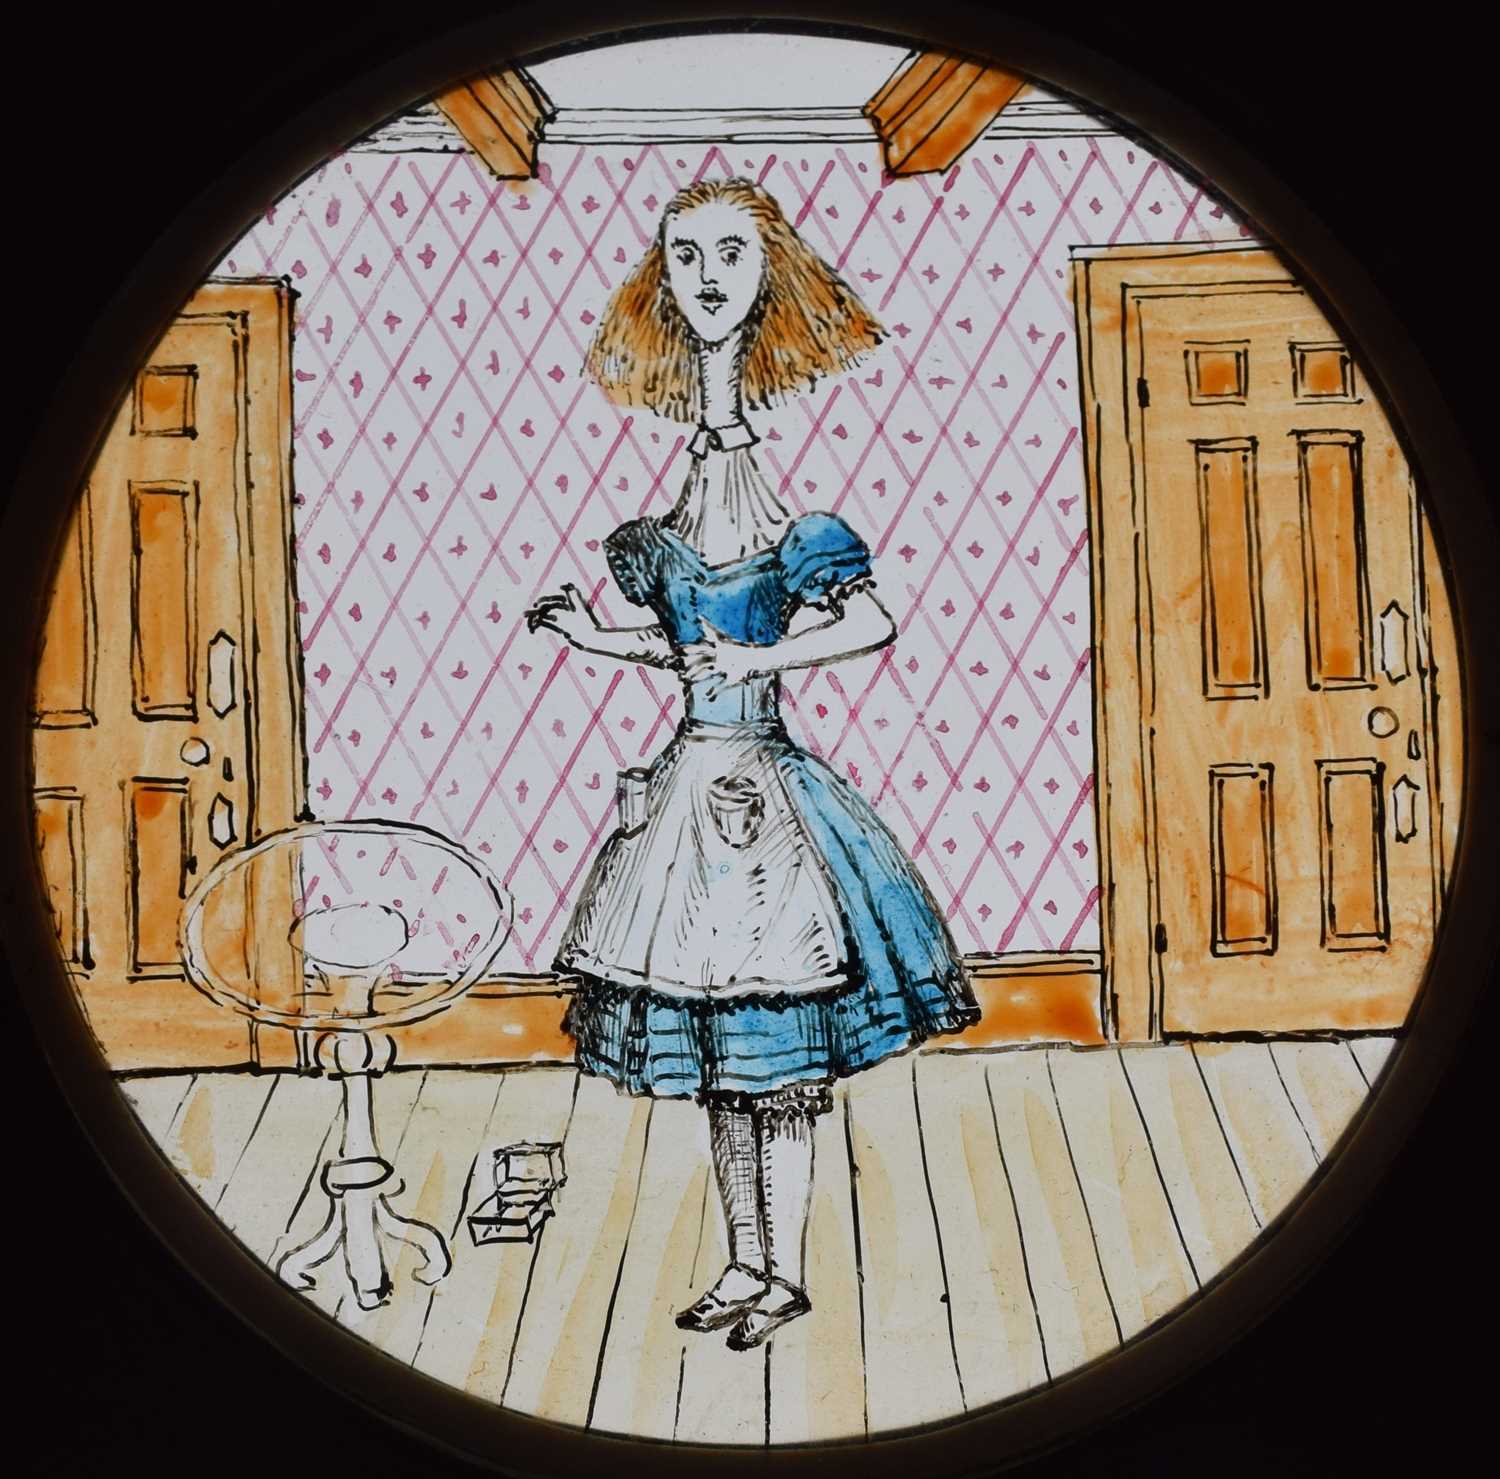 Magic Lantern Slides, Hand painted. Alice's Adventures in Wonderland & Through the Looking Glass. A - Image 20 of 48